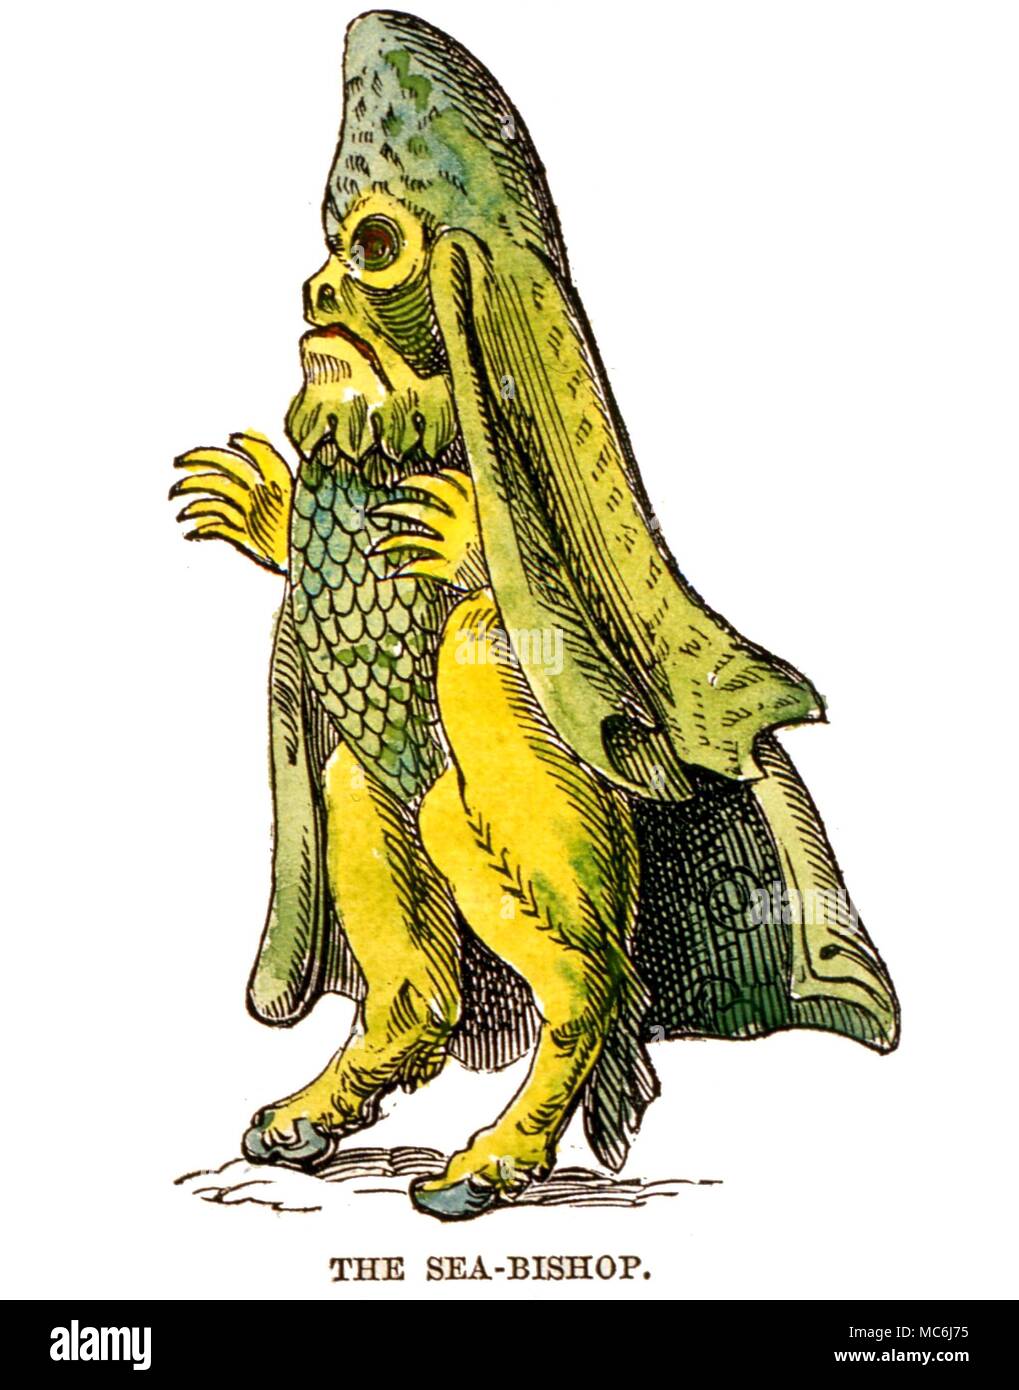 MONSTERS - SEA BISHOP The sea-bishop - a monster from traveller's tales, from a time when it was believed that the sea had the equivalent of every creature found on land. From the 1864 edition of 'The Book of Days' Stock Photo